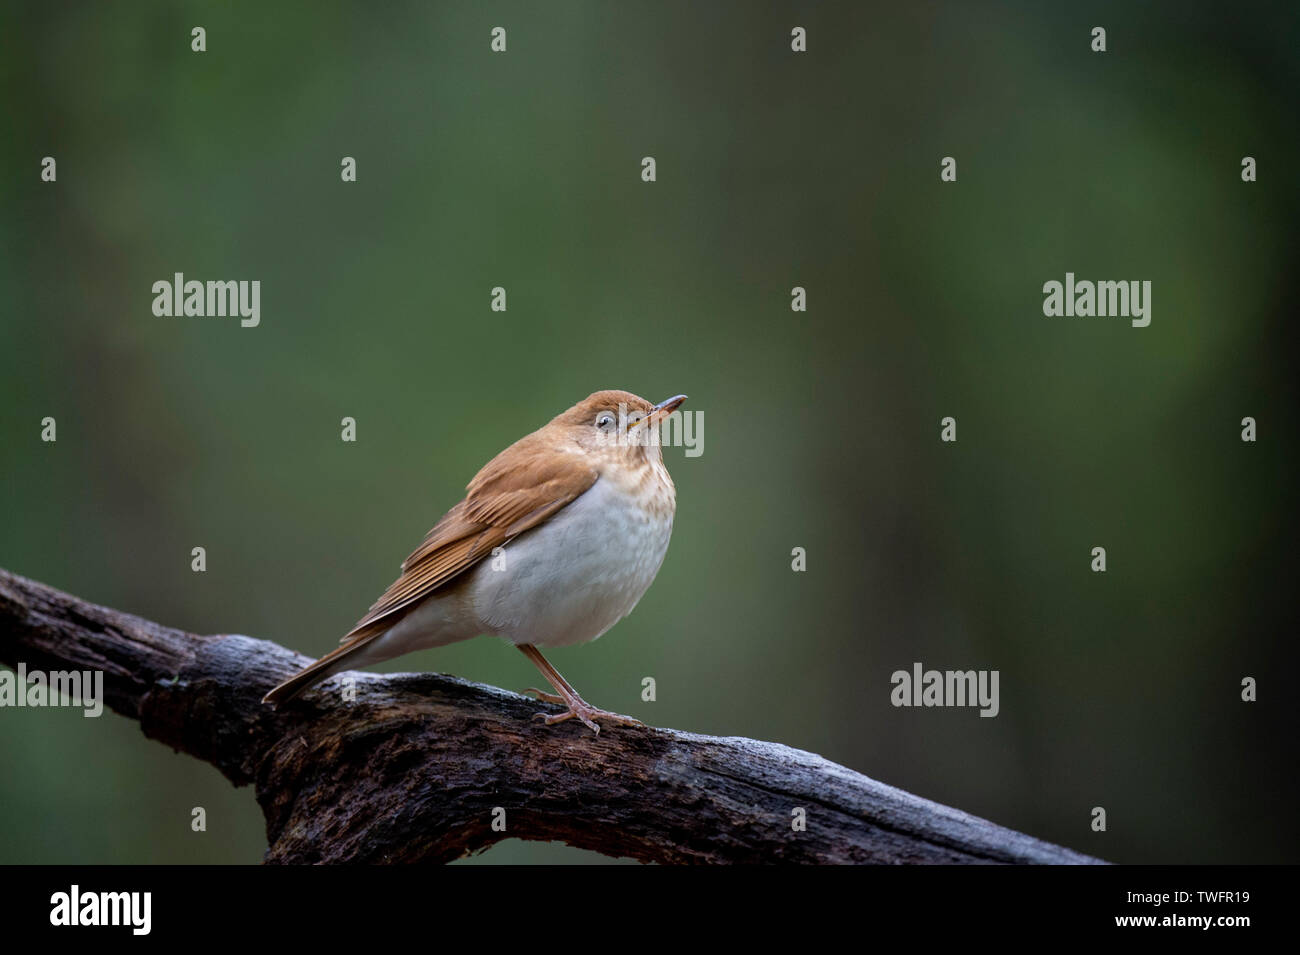 A Veery perched on a log in the soft overcast light with a smooth green background. Stock Photo